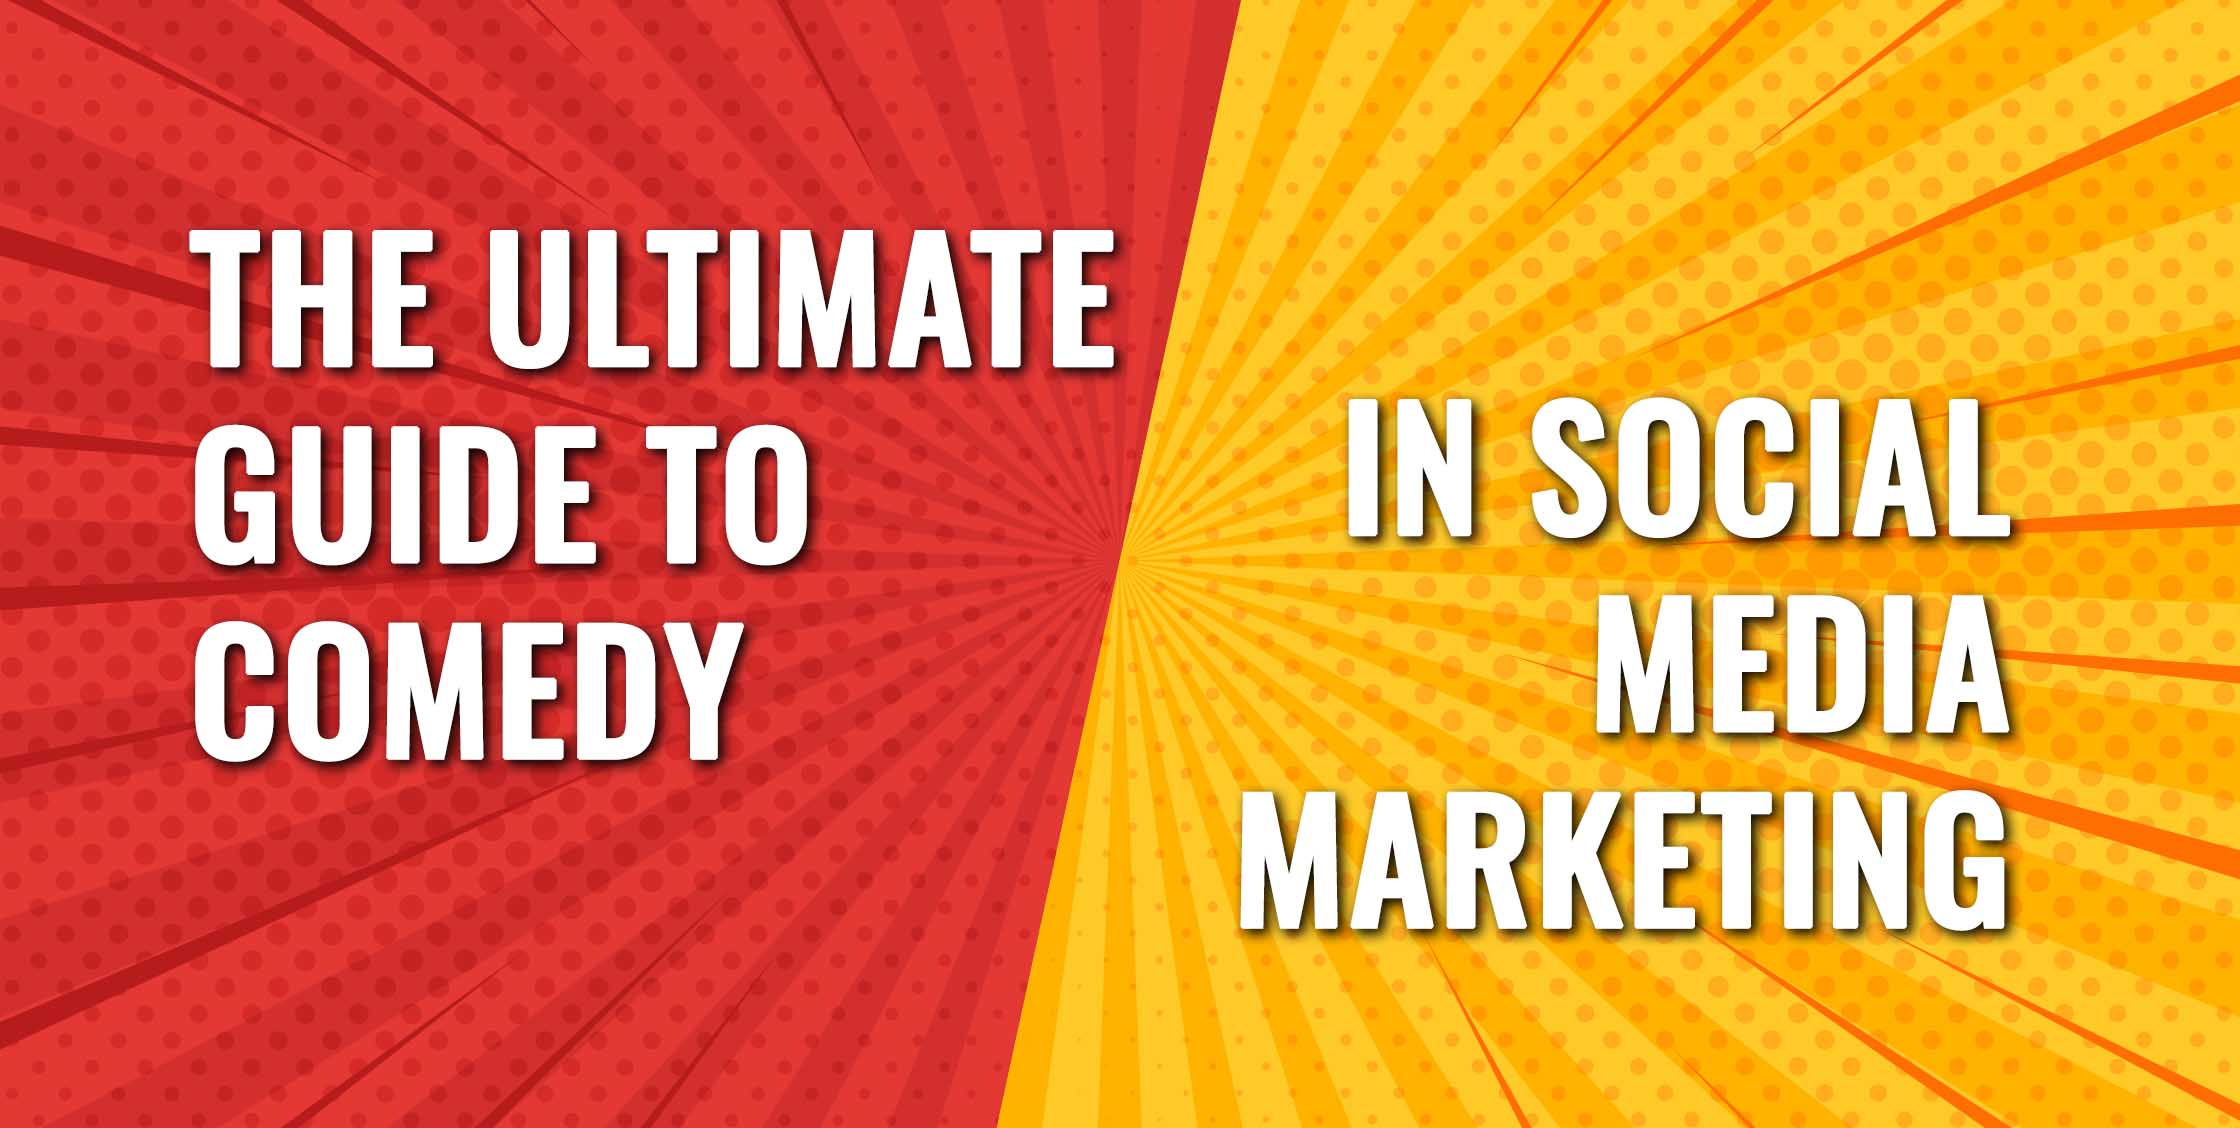 The Ultimate Guide to Comedy in Social Media Marketing